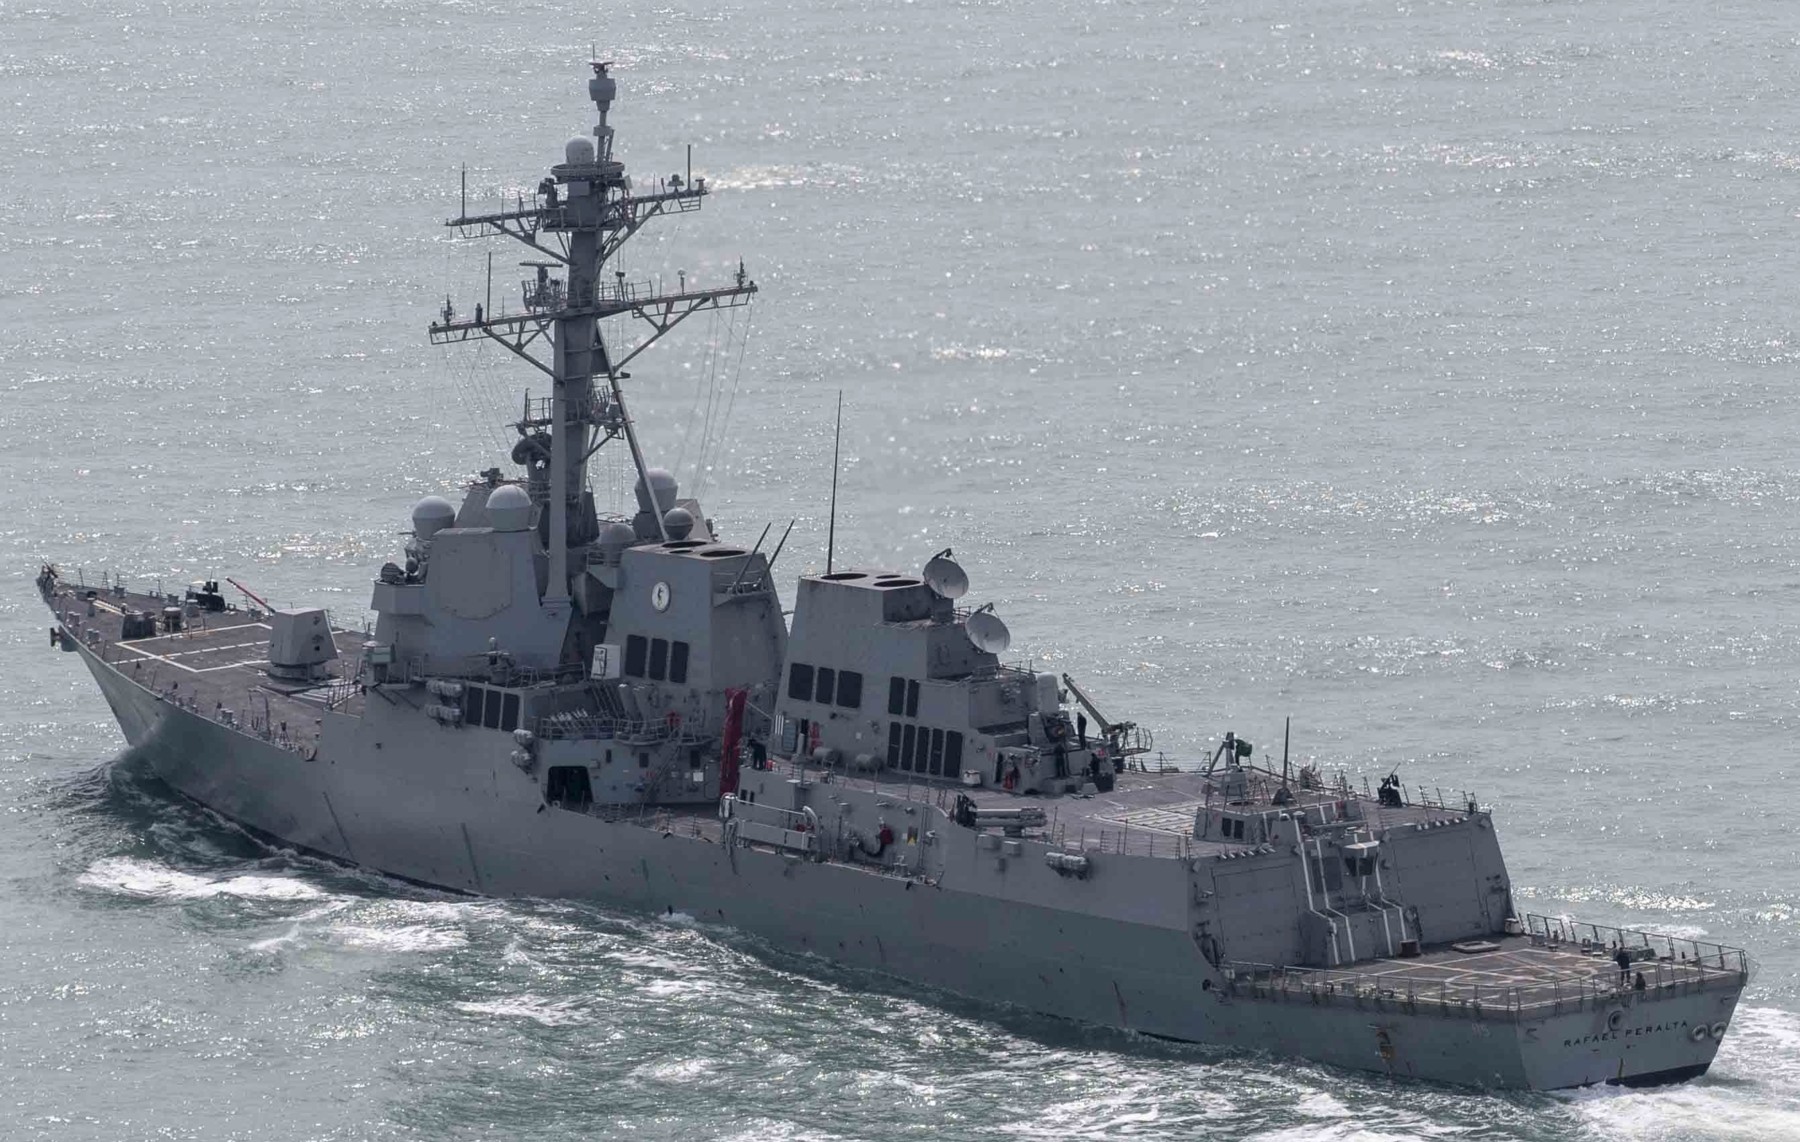 ddg-115 uss rafael peralta arleigh burke class guided missile destroyer us navy aegis 44 south china sea